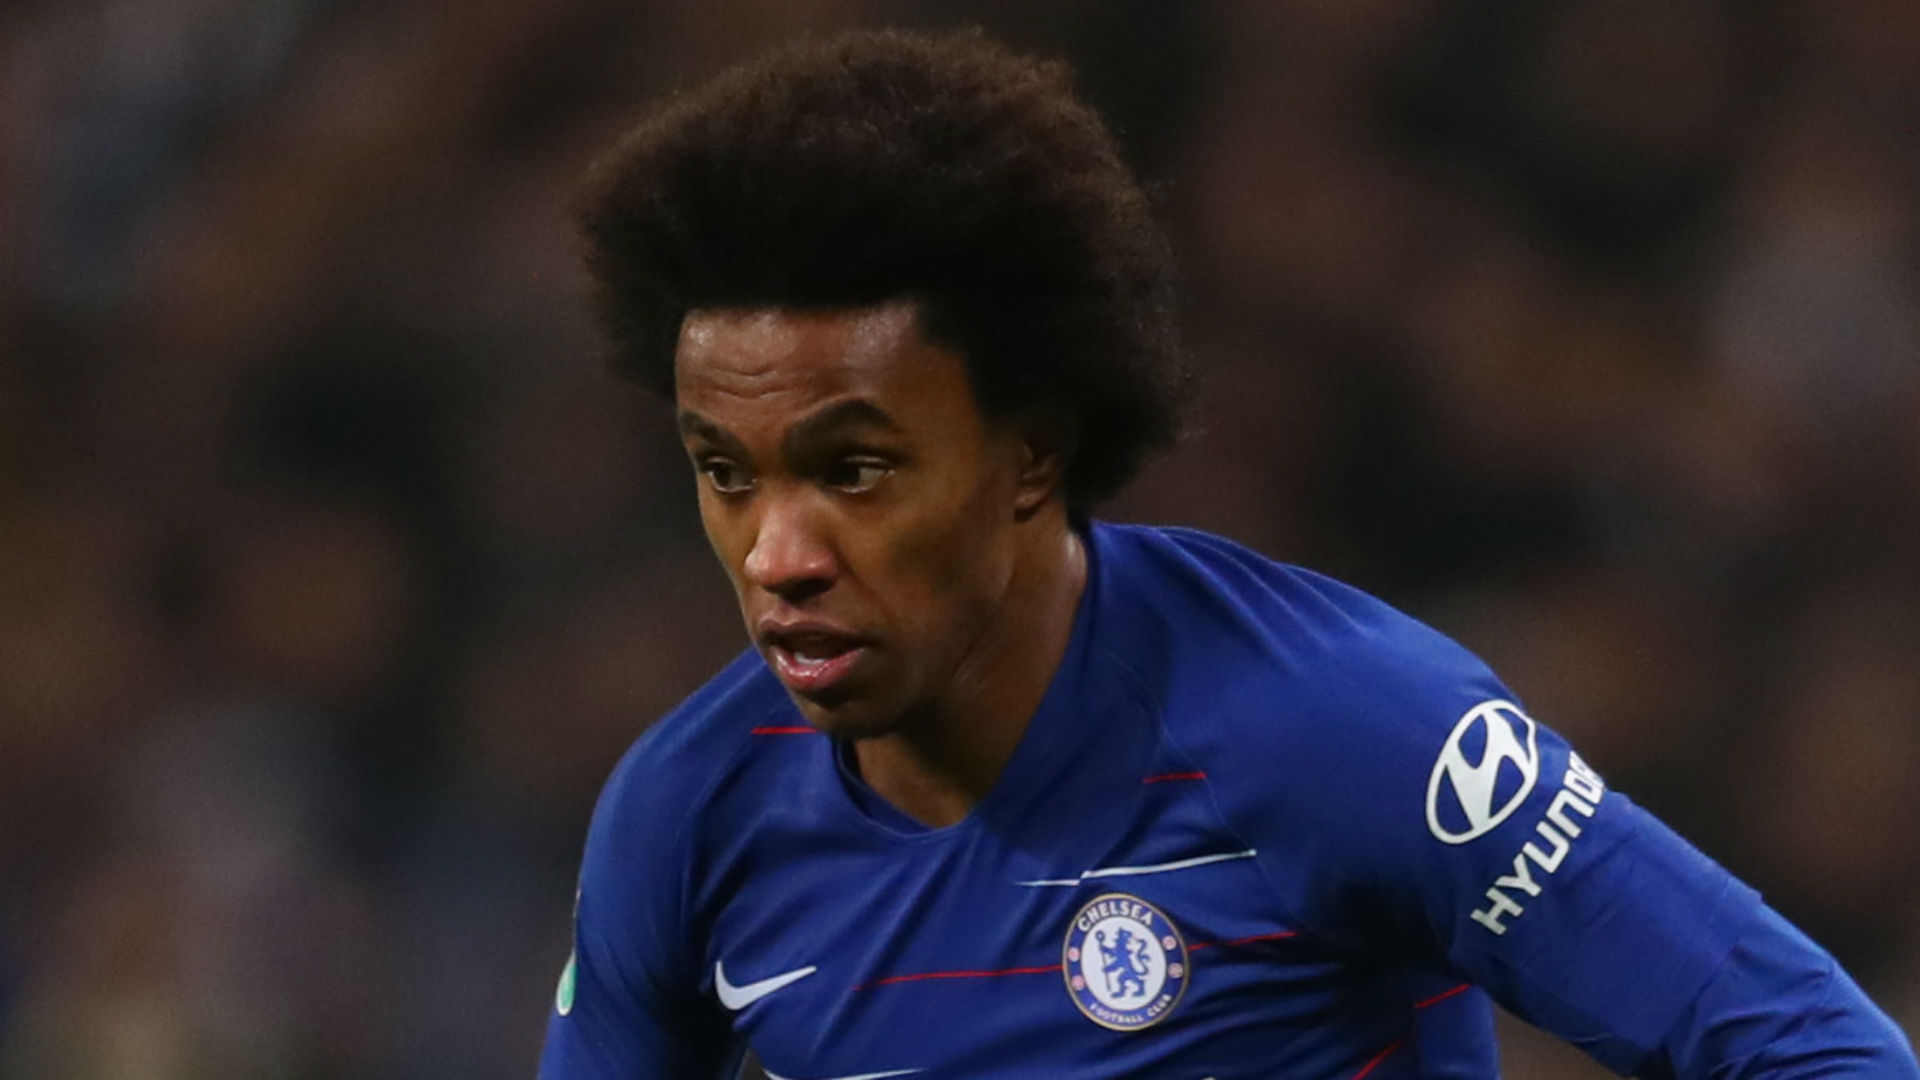 Following reports Chelsea have turned down an offer from Barcelona, Willian says his future is at Stamford Bridge.